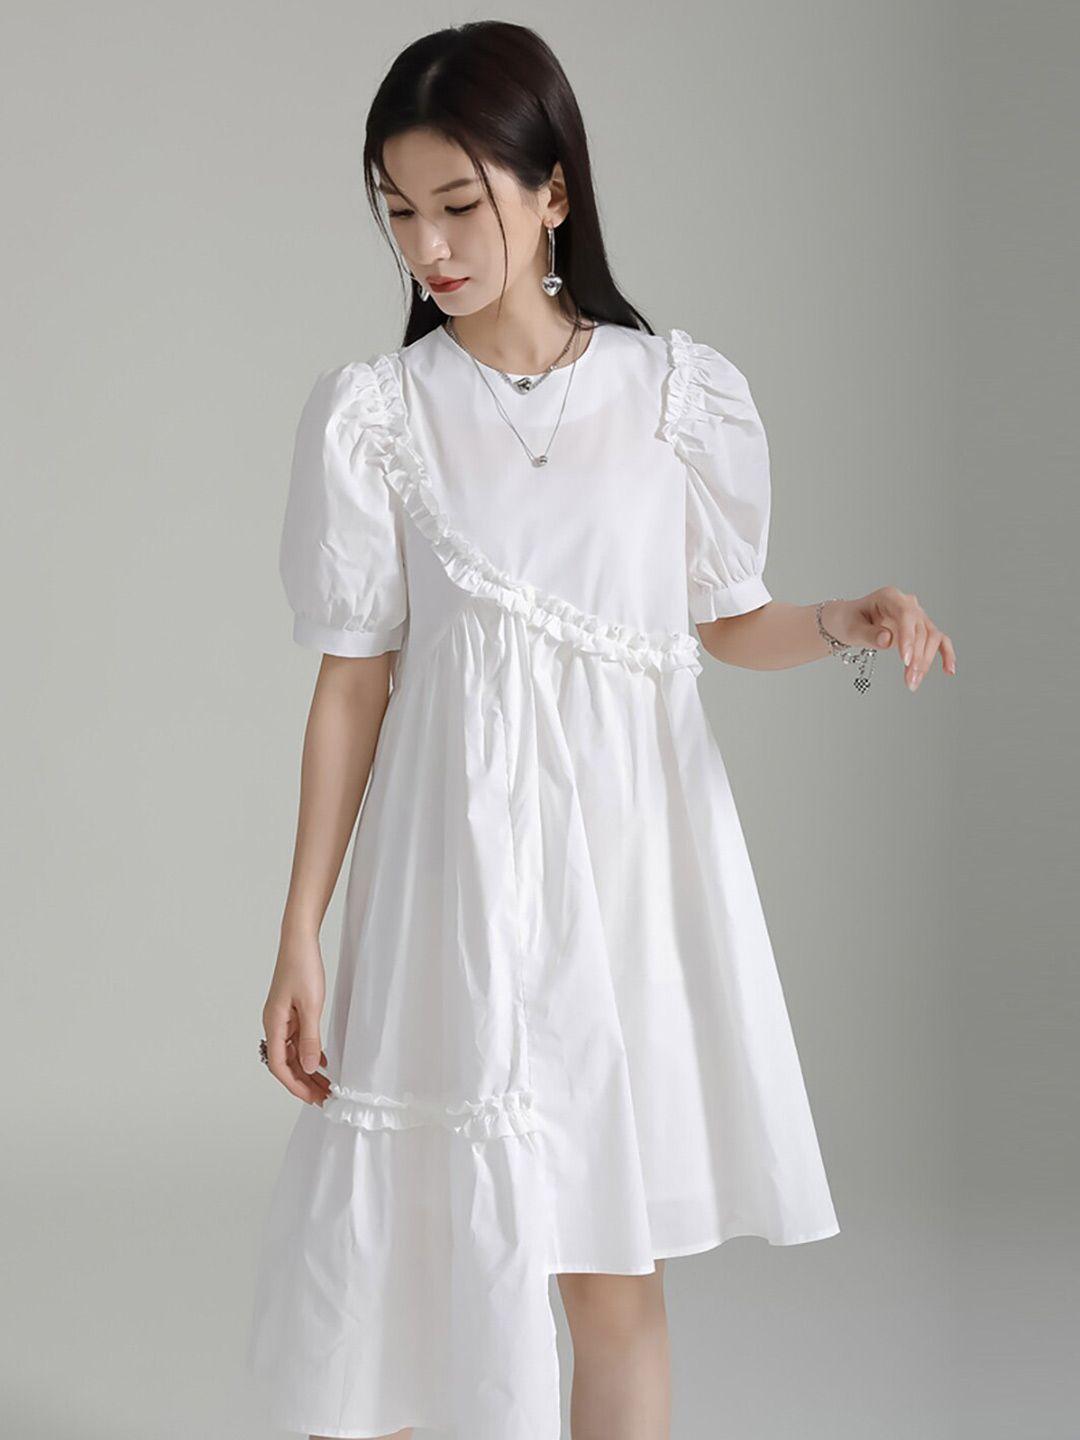 jc collection ruffled puff sleeves asymmetric a-line dress